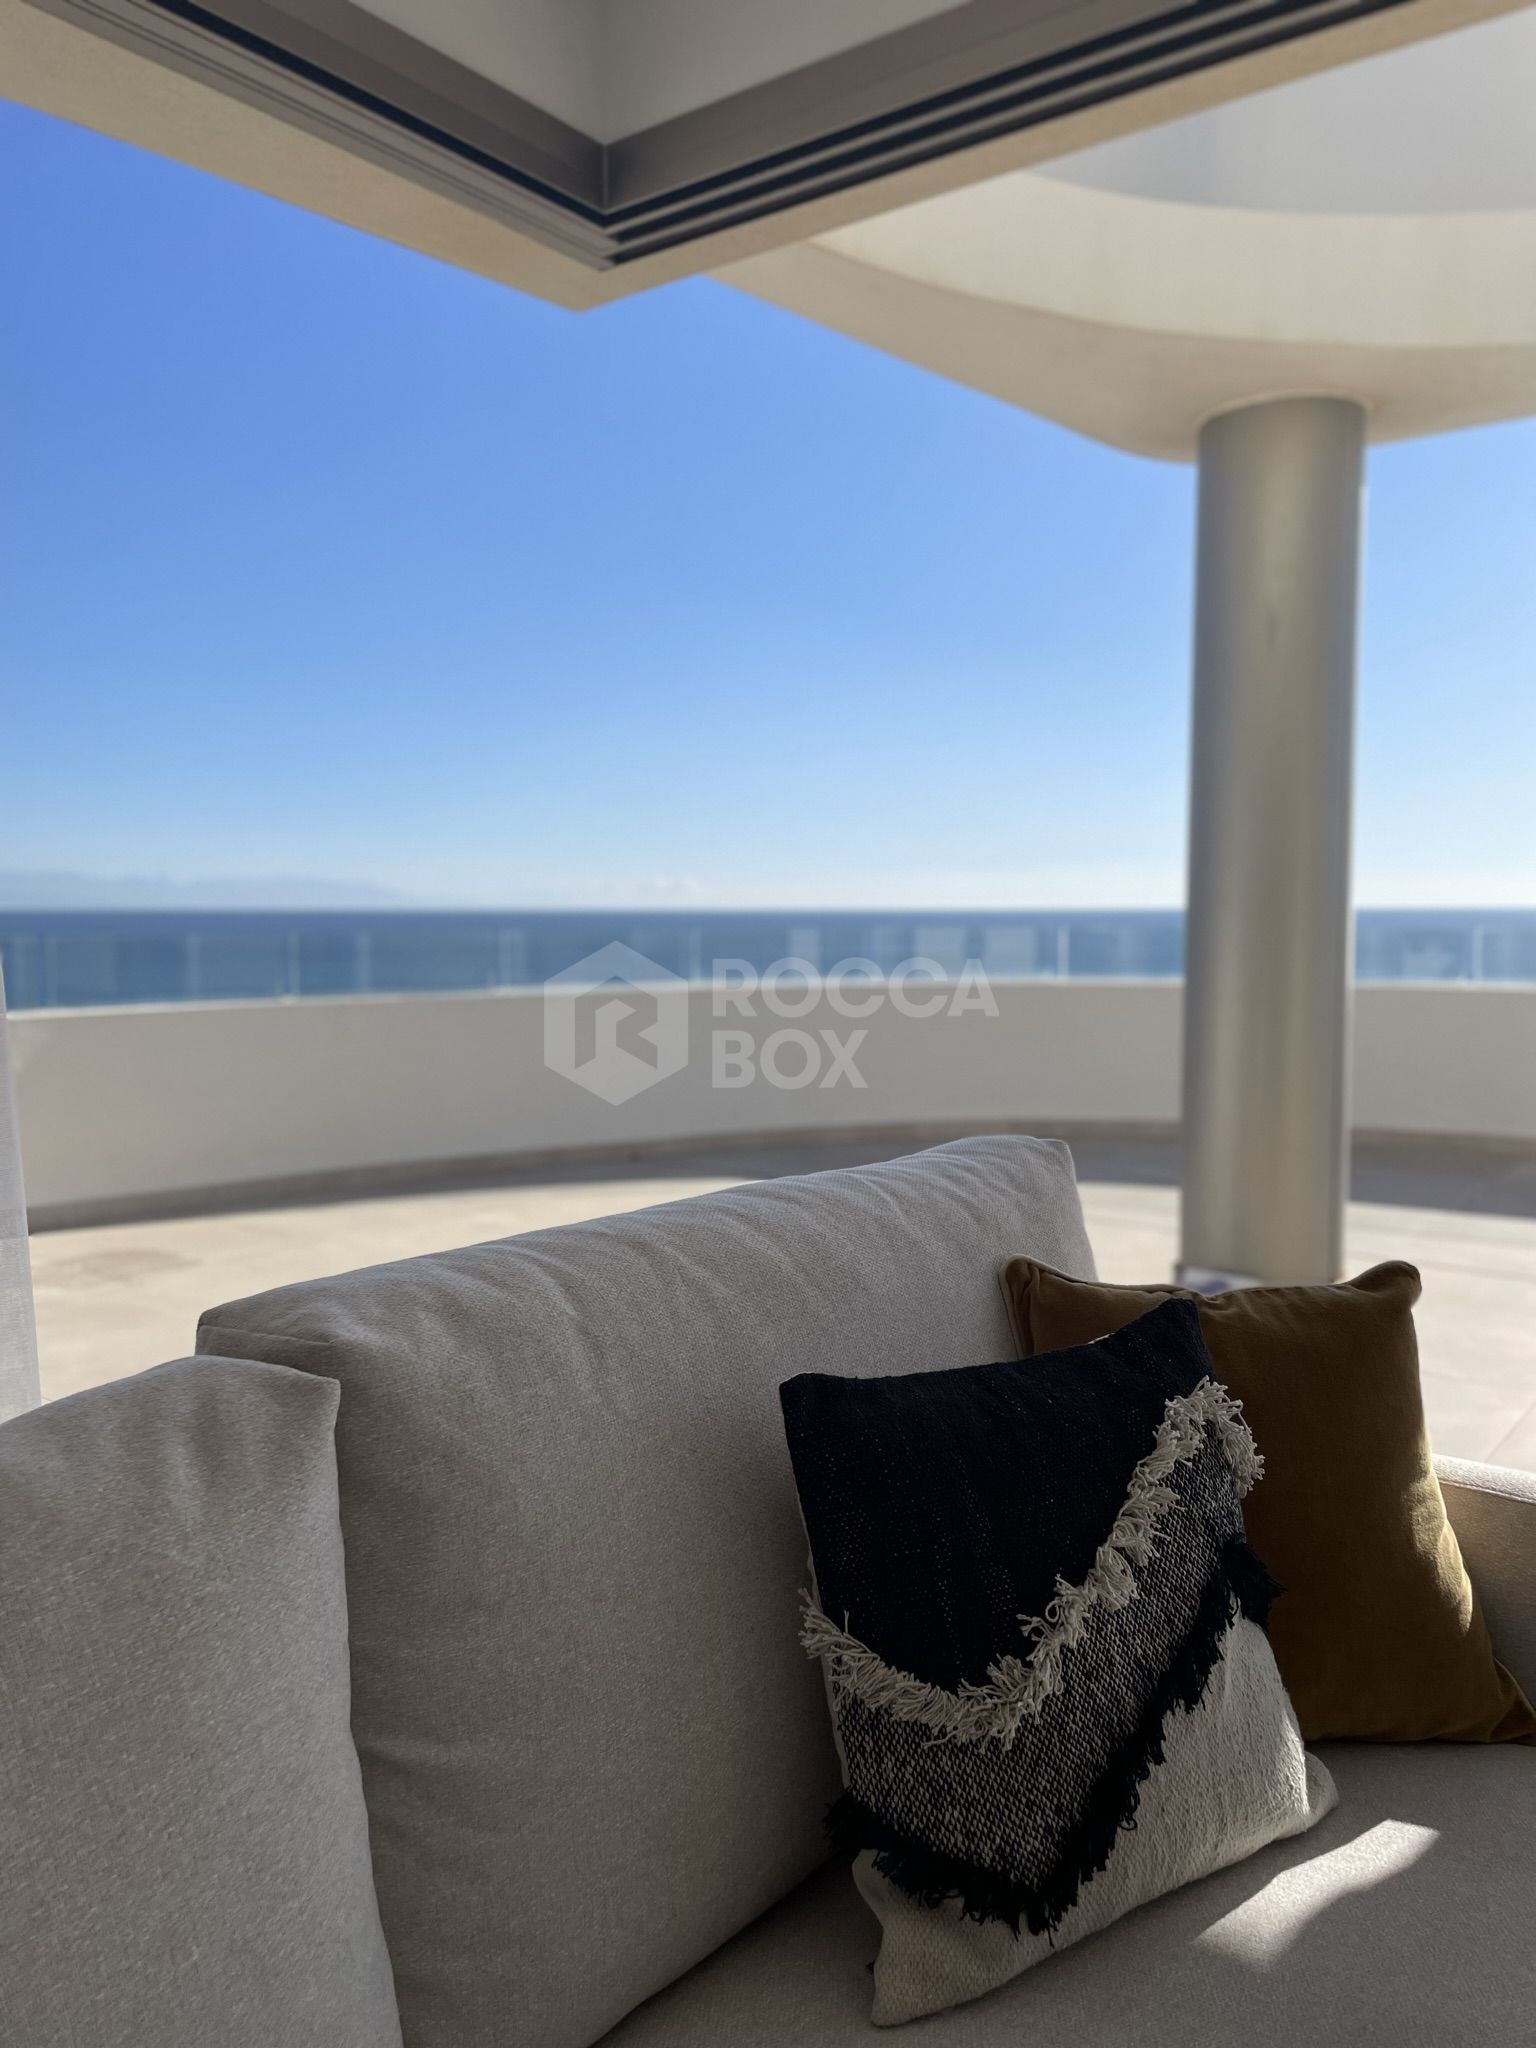 Extraordinary penthouse with seaview, walking distance to the beach